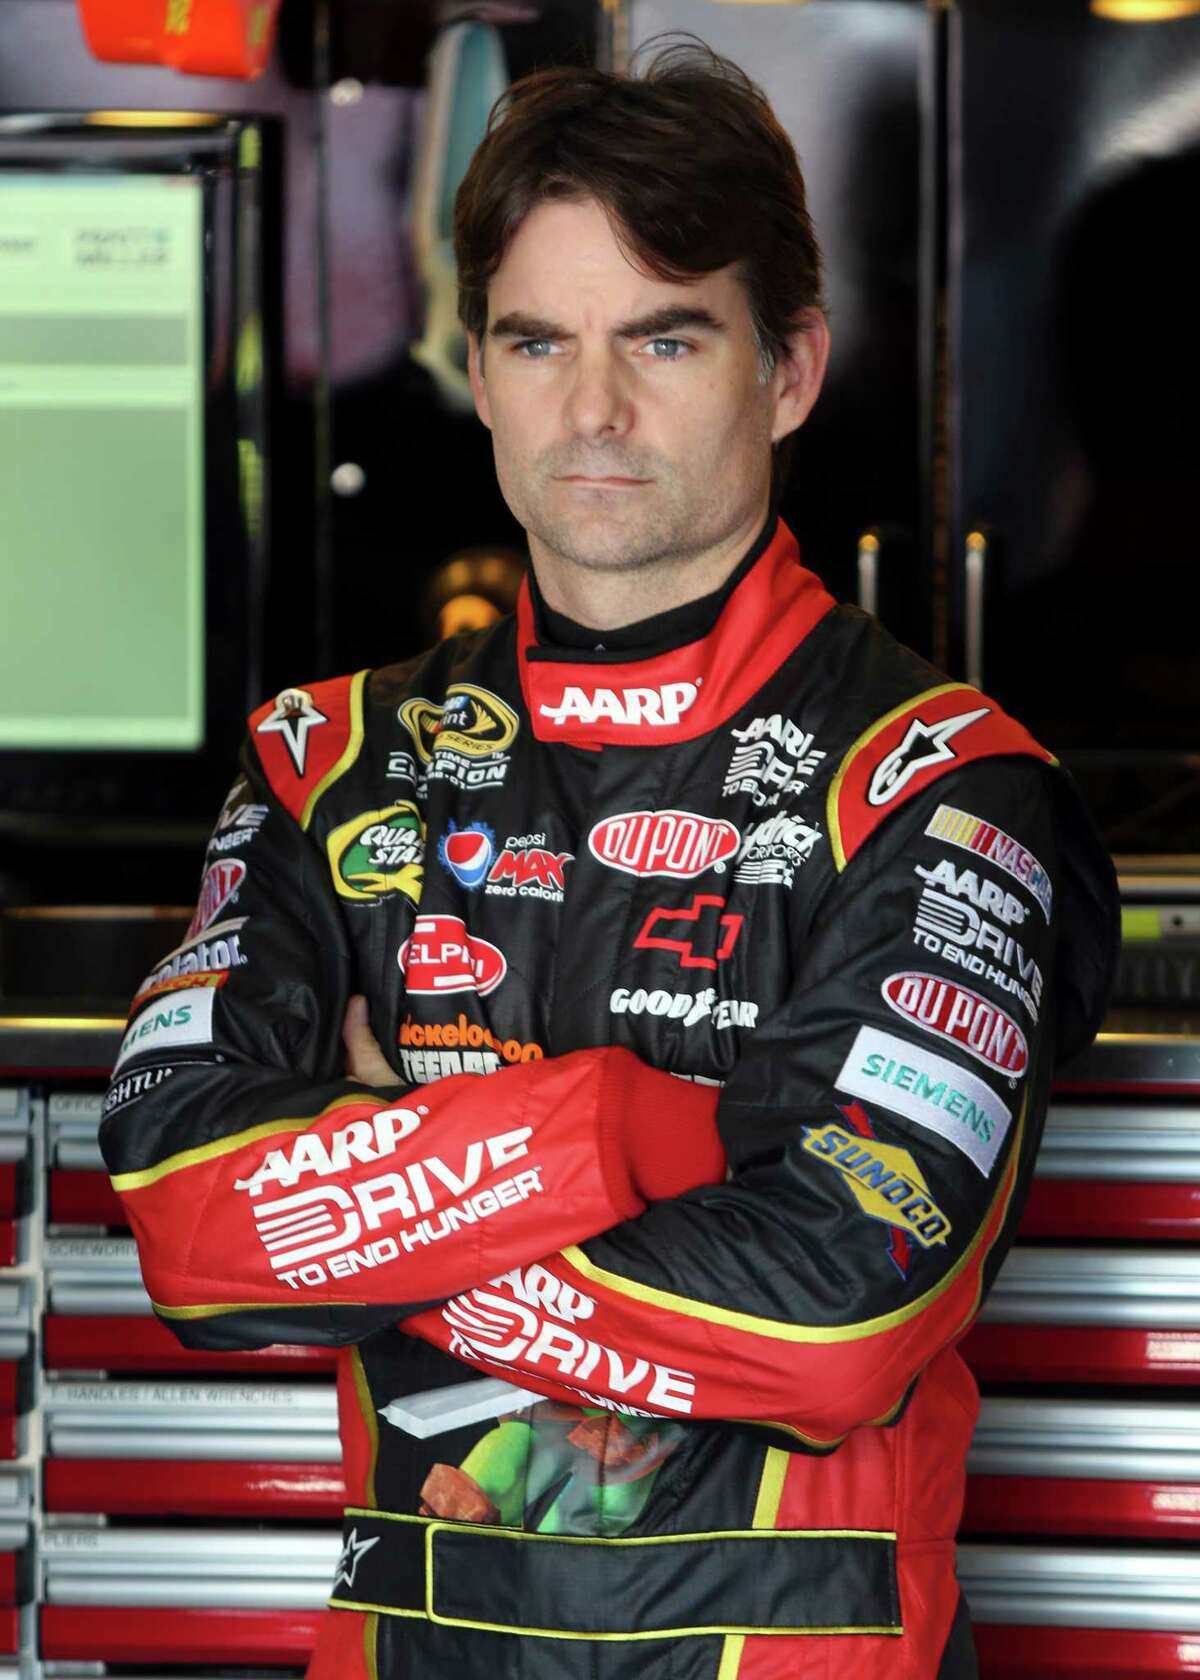 FILE - In this Oct. 12, 2012 file photo, Jeff Gordon waits before practice for the NASCAR Bank of America 500 Sprint Cup series auto race in Concord, N.C. NASCAR has a real dilemma on its hands with this whole Gordon mess hanging over the season finale, Sunday, Nov. 18, 2012 at Homestead-Miami Speedway. (AP Photo/Bob Jordan, File)